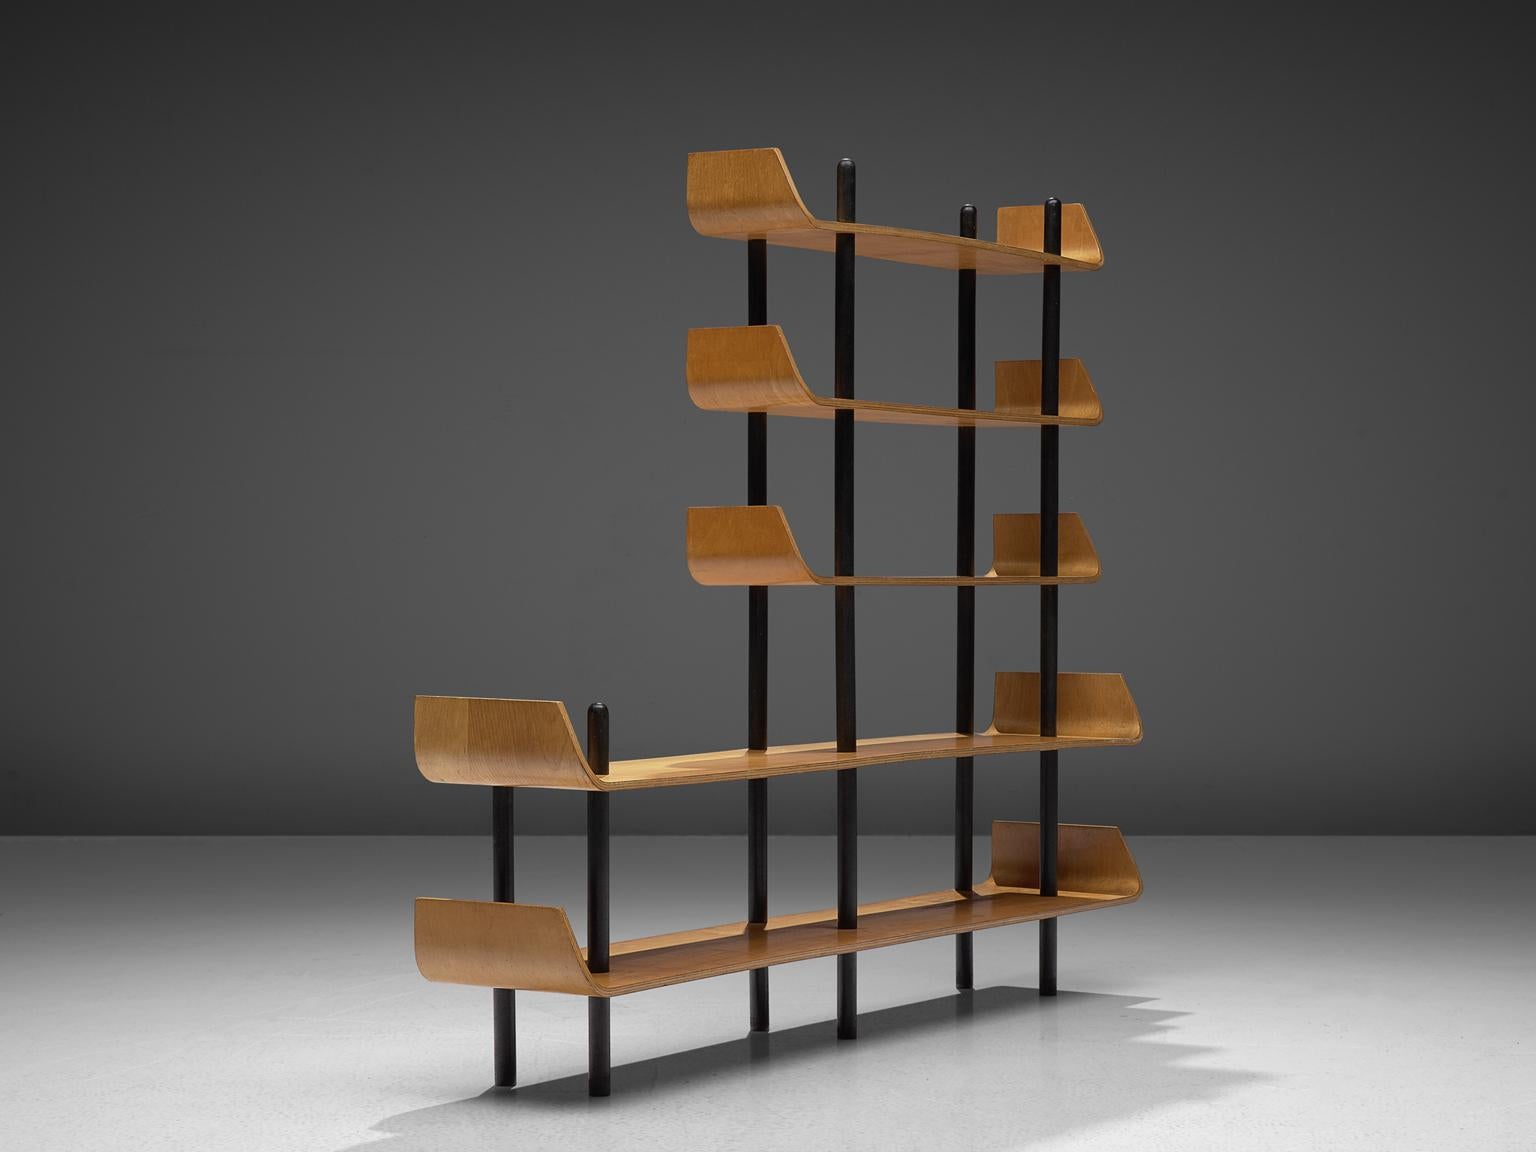 Willem Lutjes for Den Boer Gouda, bookcase, plywood, the Netherlands 1953.

Bookcase with five shelves in maple plywood. Each shelve has curved ends, characteristic for this design by Lutjens. Hold together by six black coated stands, which are in